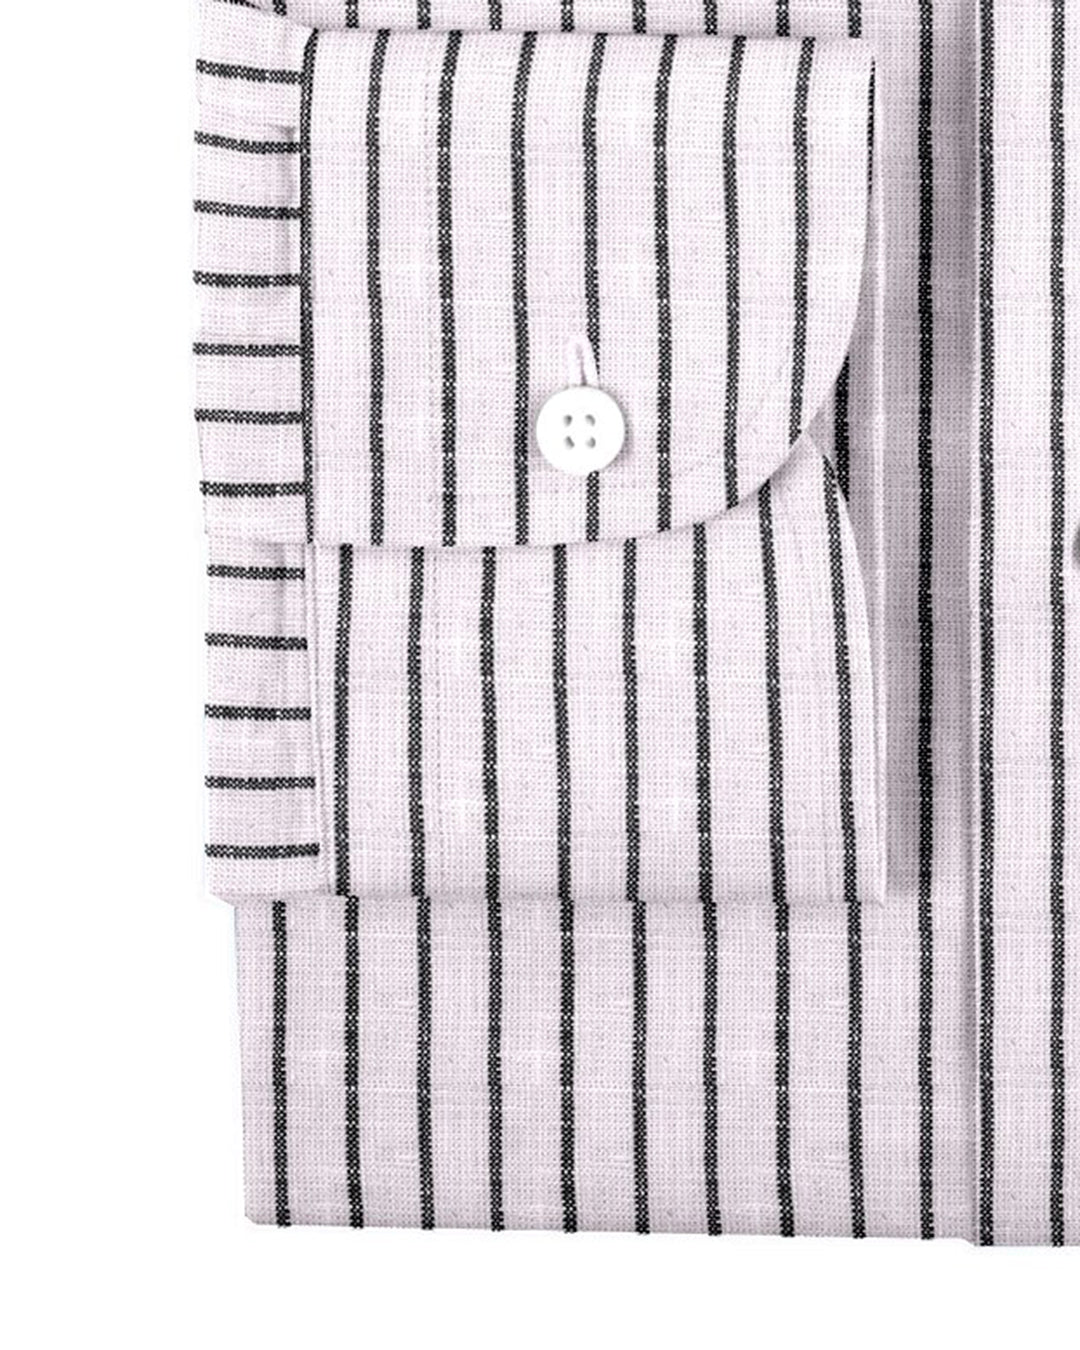 Cuff of the custom linen shirt for men in white and black pinstripes by Luxire Clothing